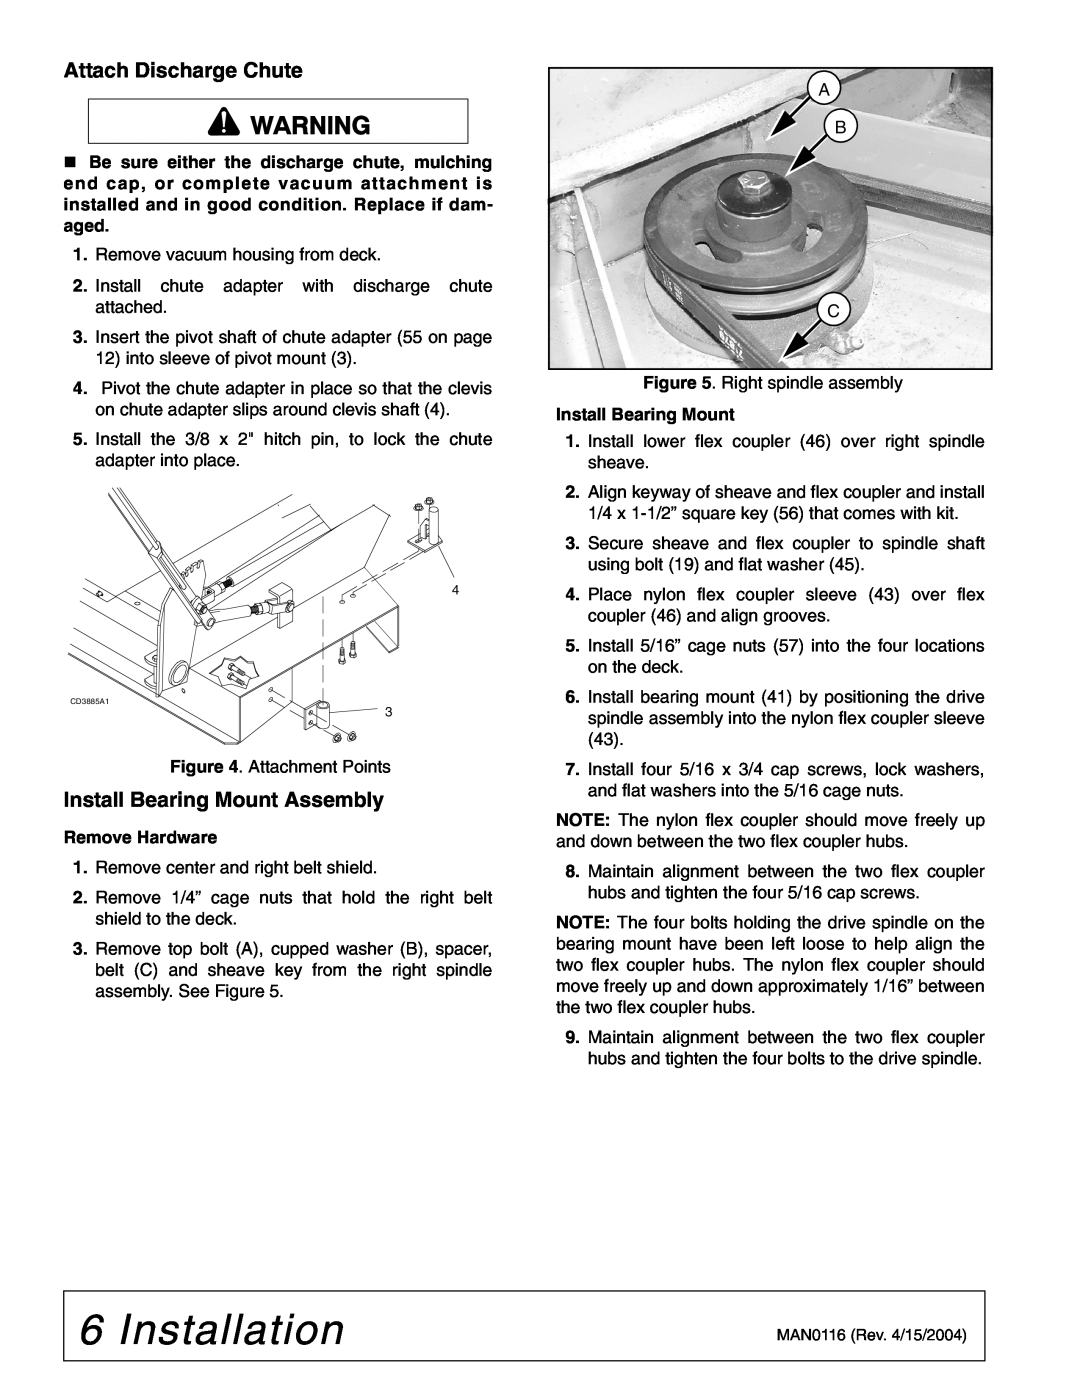 Woods Equipment D5221T, D6121T manual Installation, Install Bearing Mount Assembly, Remove Hardware 